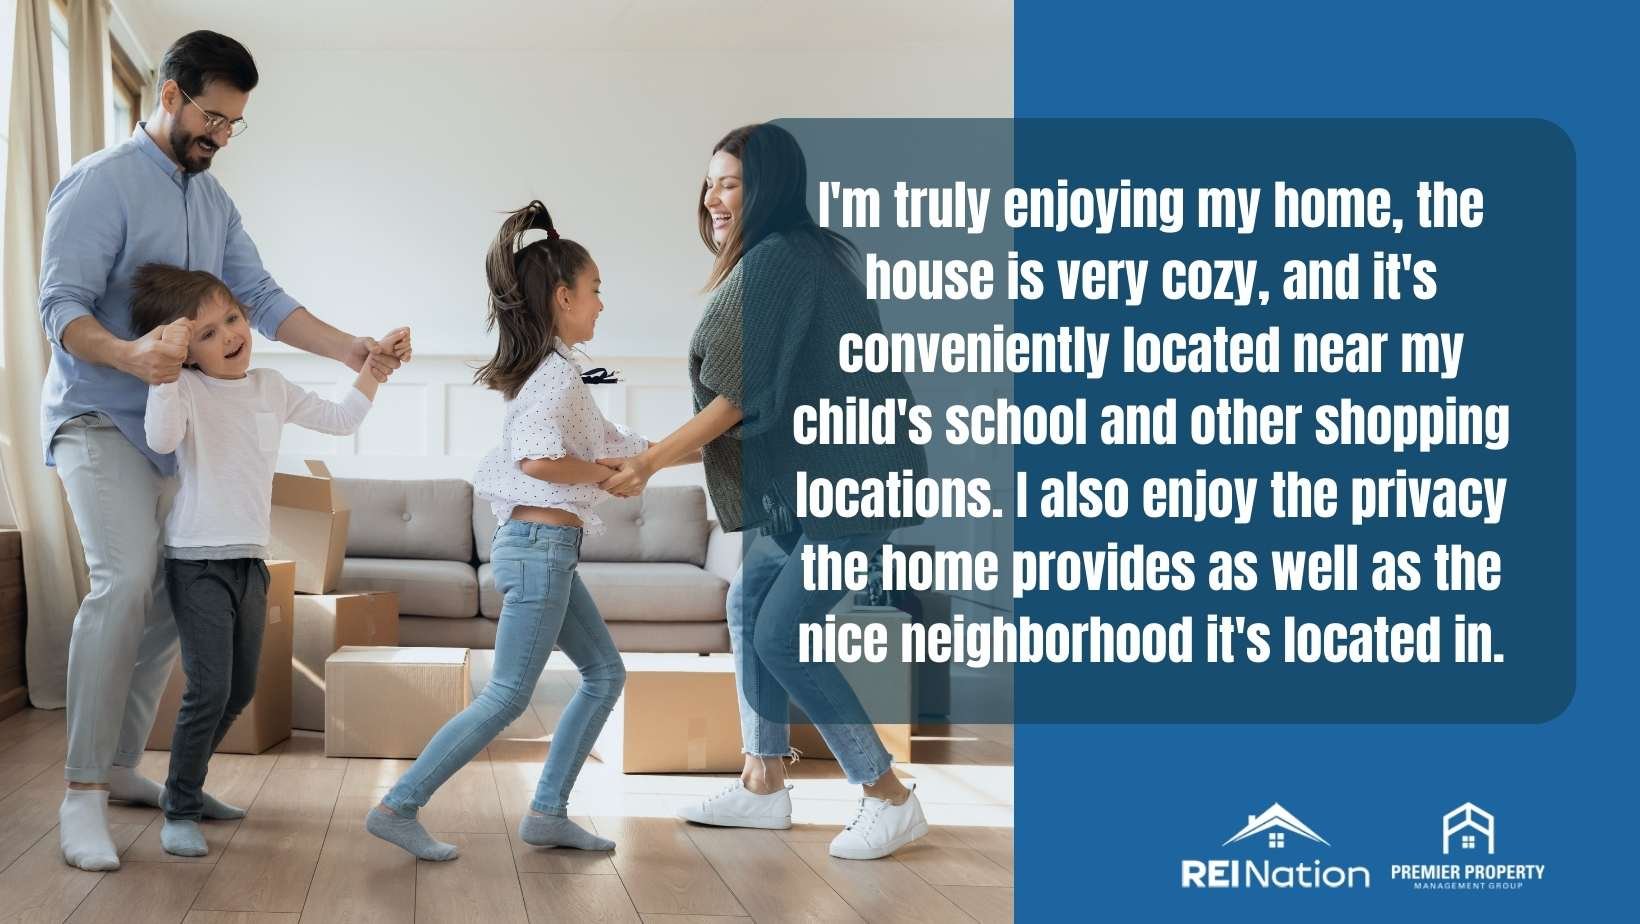 Resident response: I'm truly enjoying my home, the house is very cozy, and it's conveniently located near my child's school and other shopping locations. I also enjoy the privacy the home provides as well as the nice neighborhood it's located in.